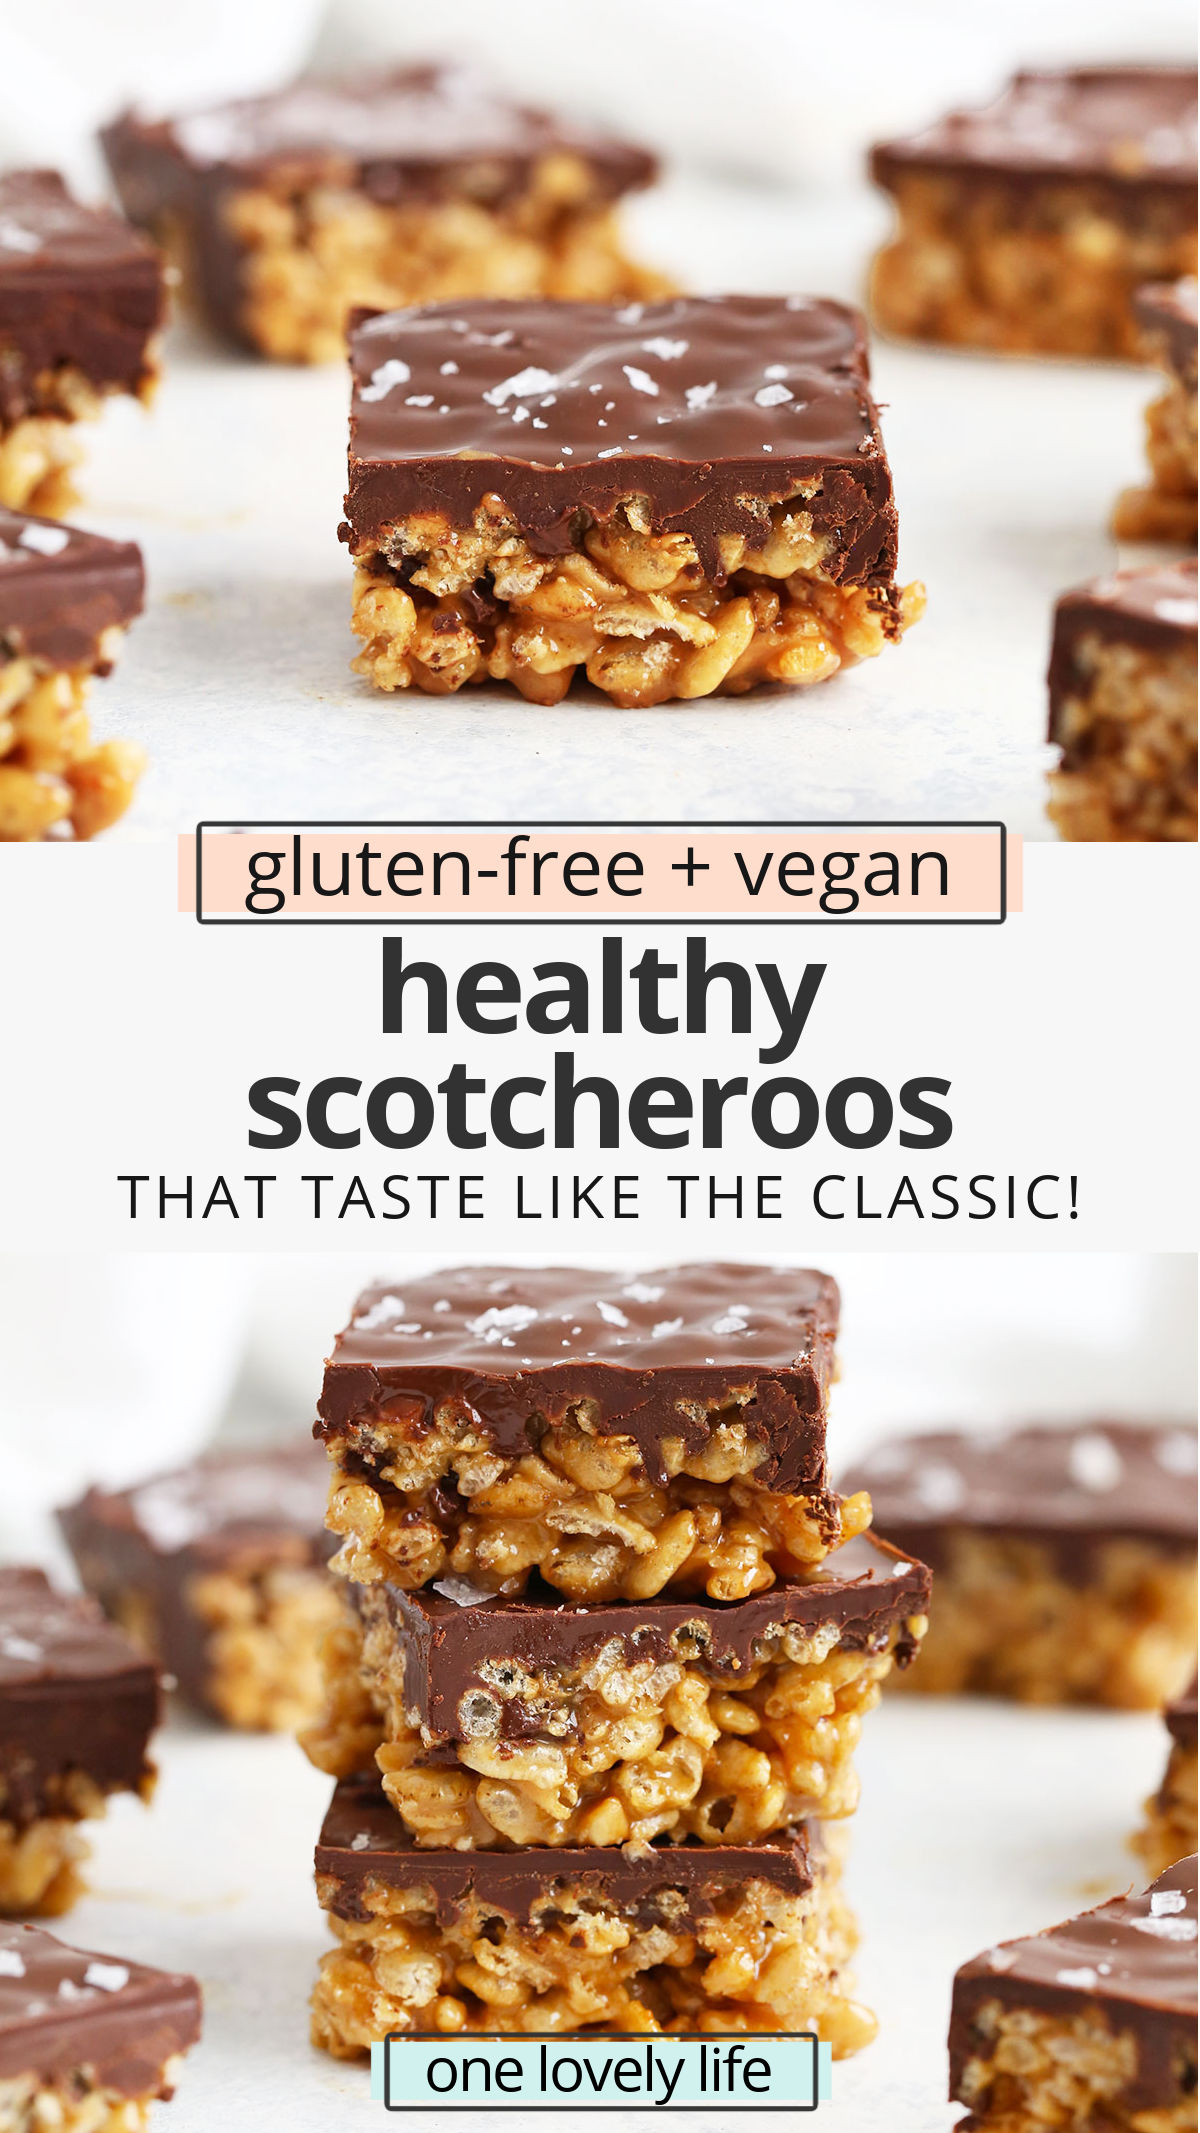 Healthy Scotcheroos - My childhood remade without corn syrup or refined sugar! You'll love these gooey peanut butter rice krispies treats with chocolate topping just as much as the original. (Gluten free & vegan) // Rice Krispies Treats // No Bake Dessert // #vegan #ricekrispiestreats #nobakedessert #chocolate #scotcheroos #glutenfree